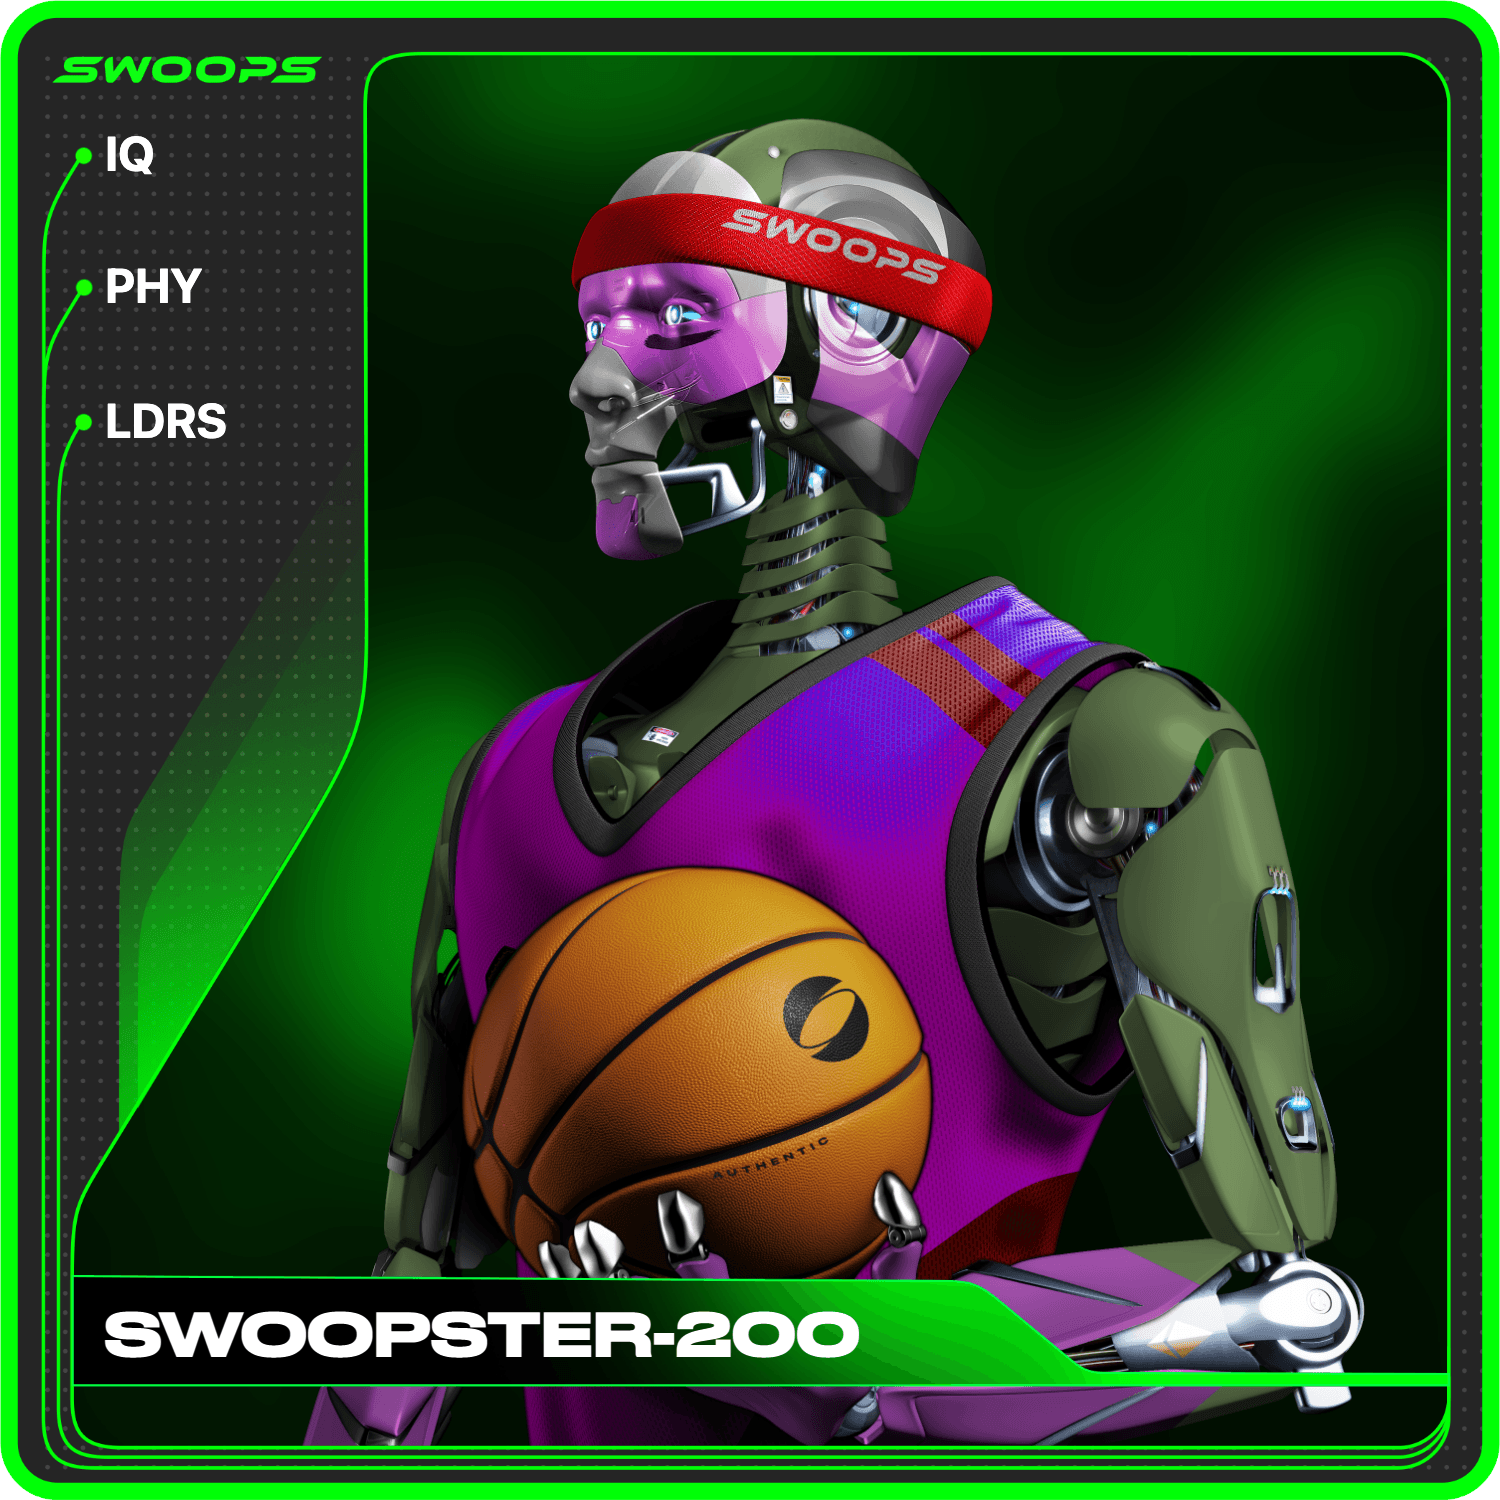 SWOOPSTER-200